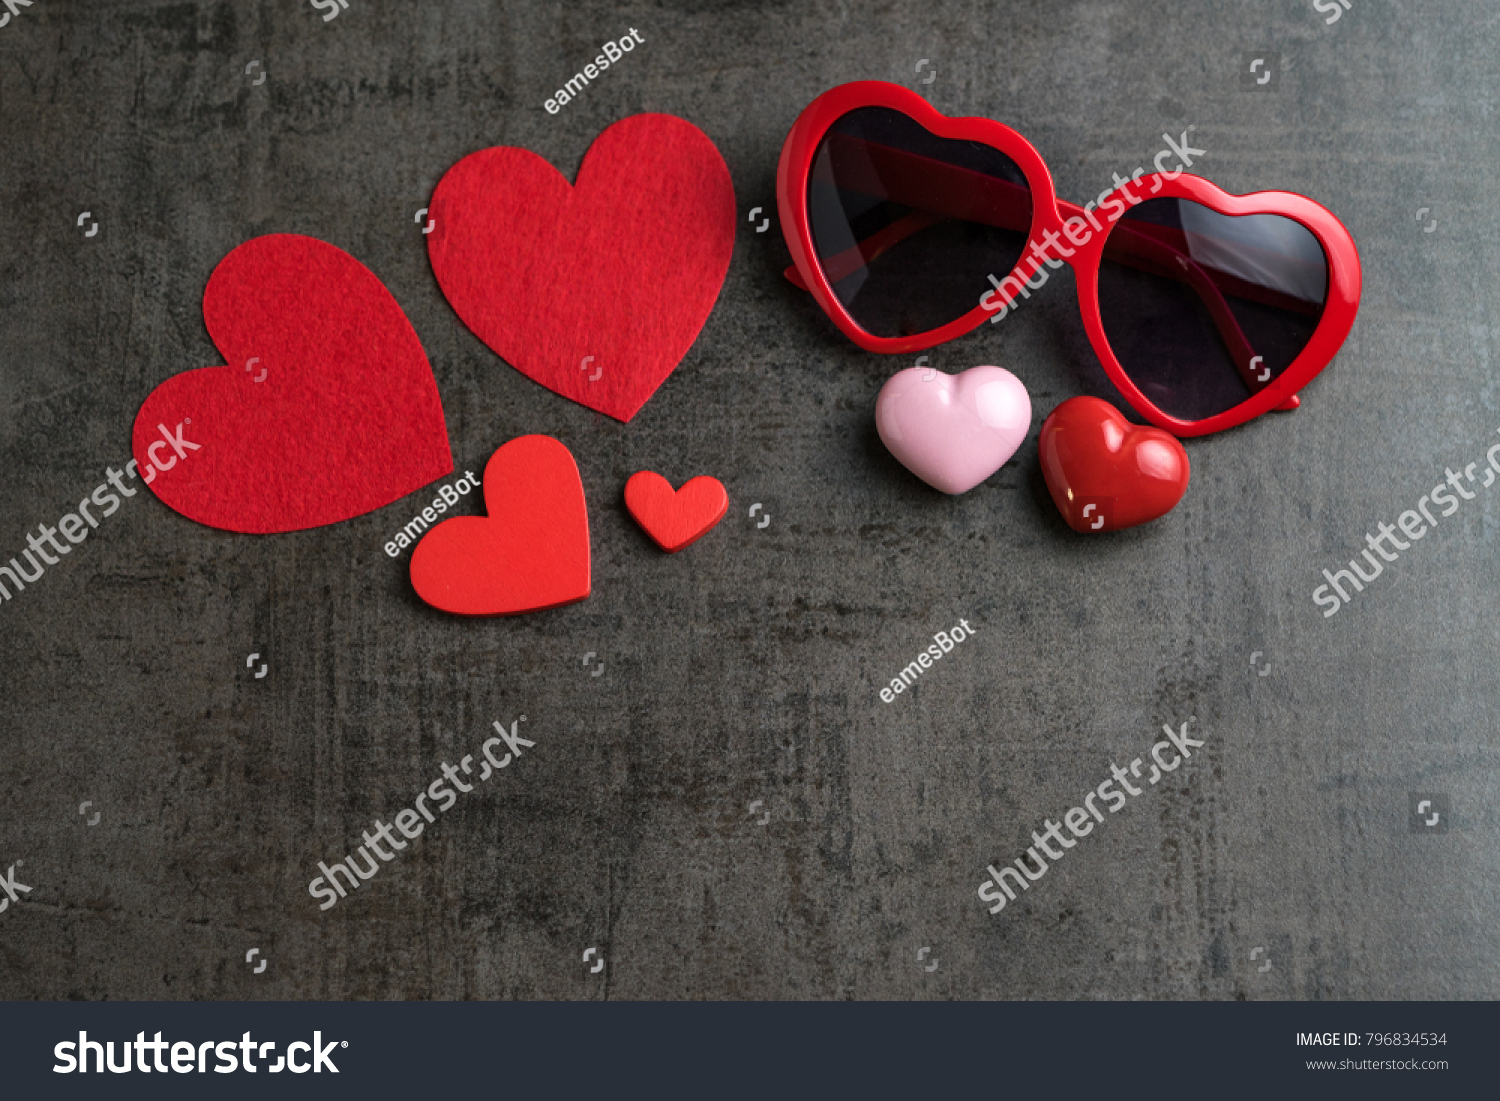 Red and pink heart shapes with heart shape eyeglasses on black cement wallpaper as Valentine's day concept with copy space. #796834534